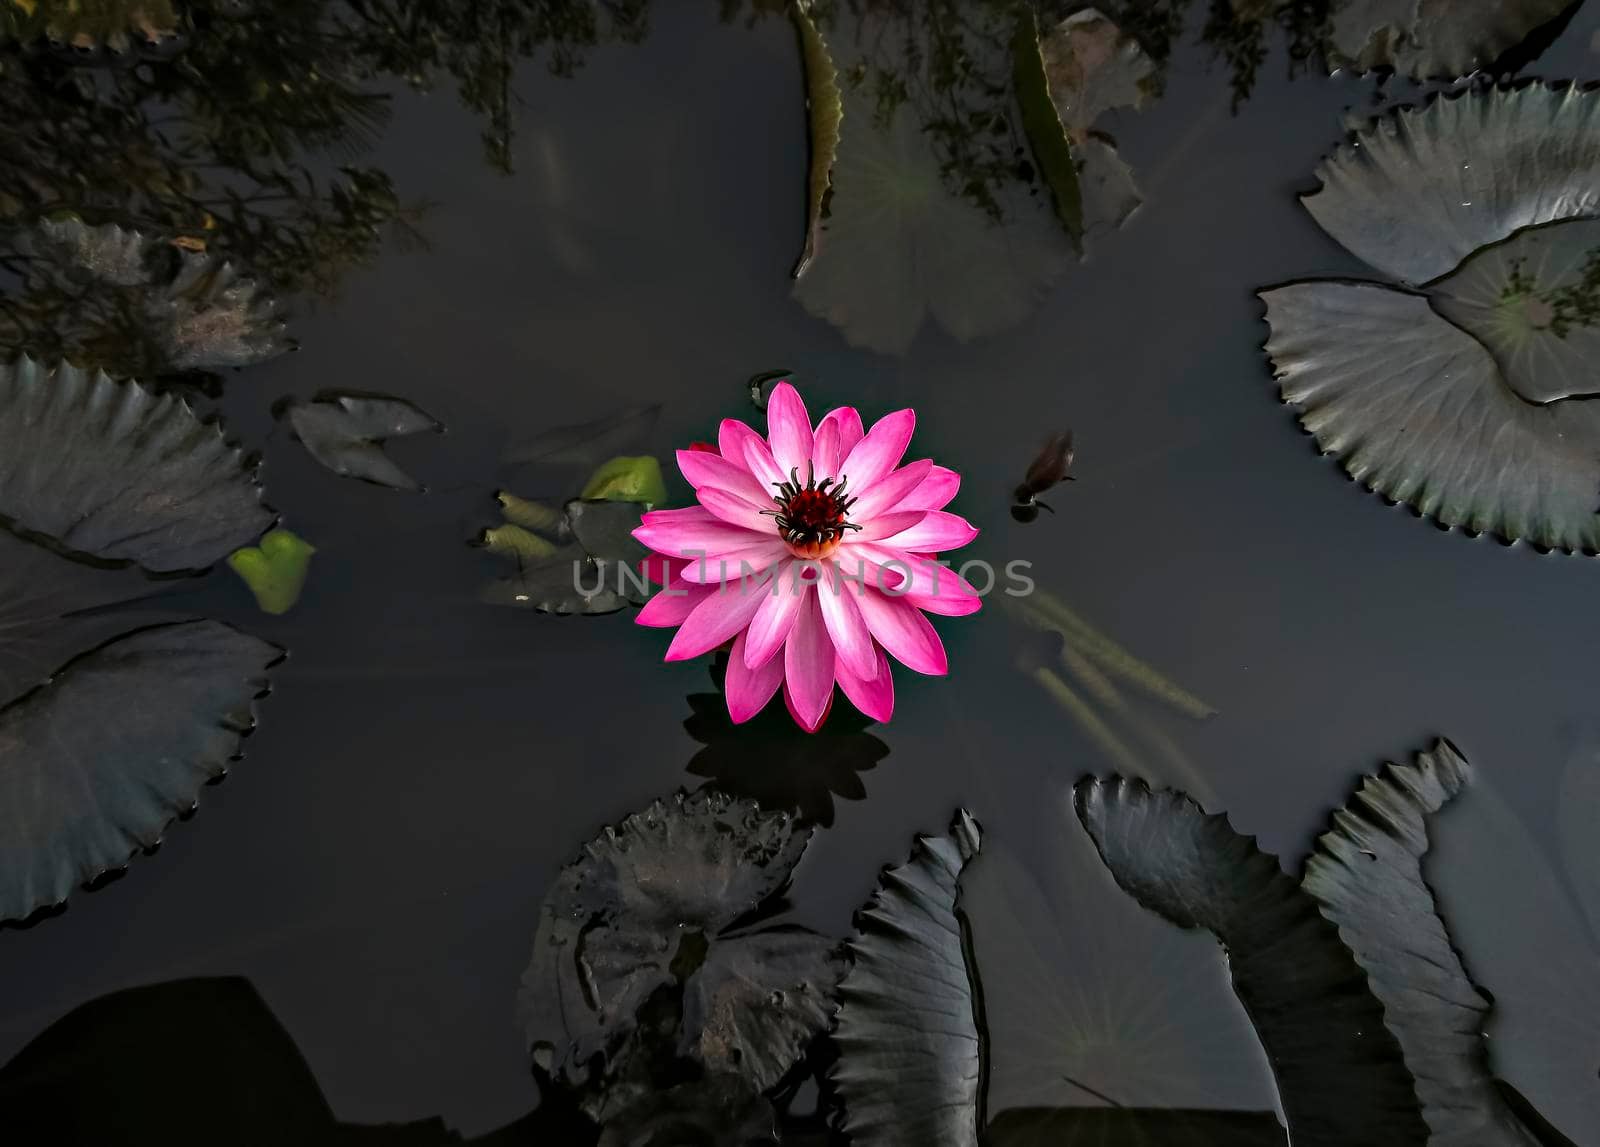 Isolated, close up image of a beautiful dark pink lotus flower with leaves in water.